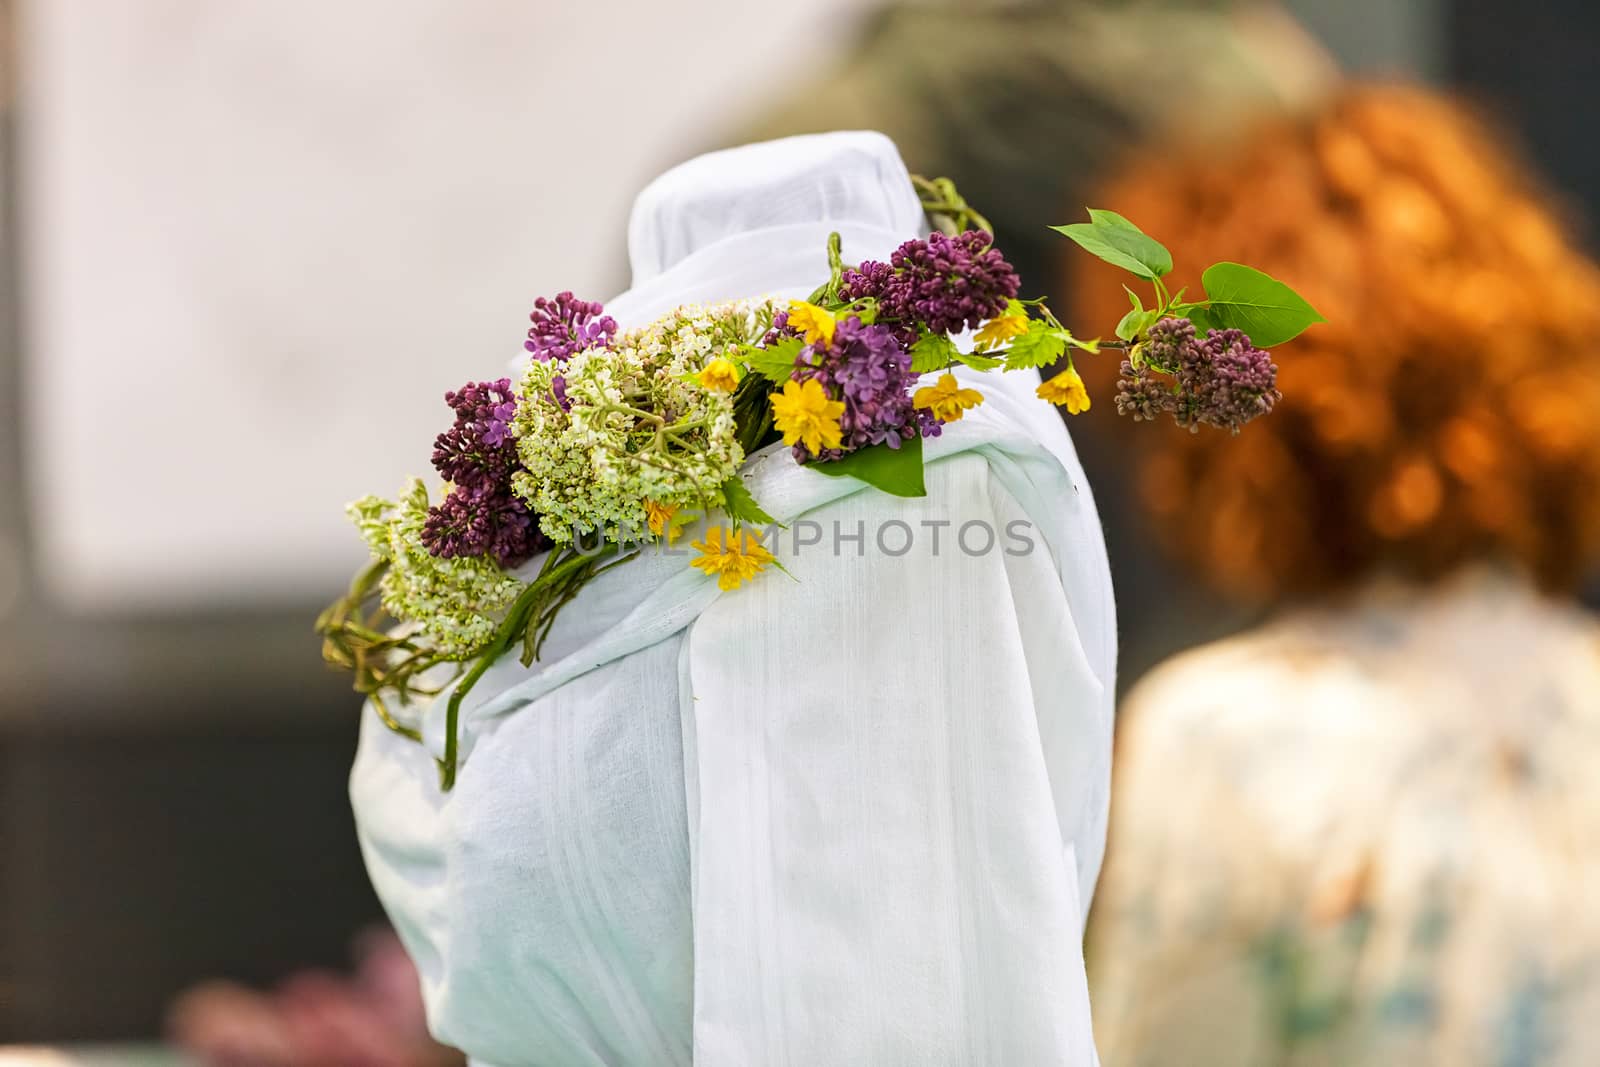 traditional costum with decoration of flowers, note shallow depth of field